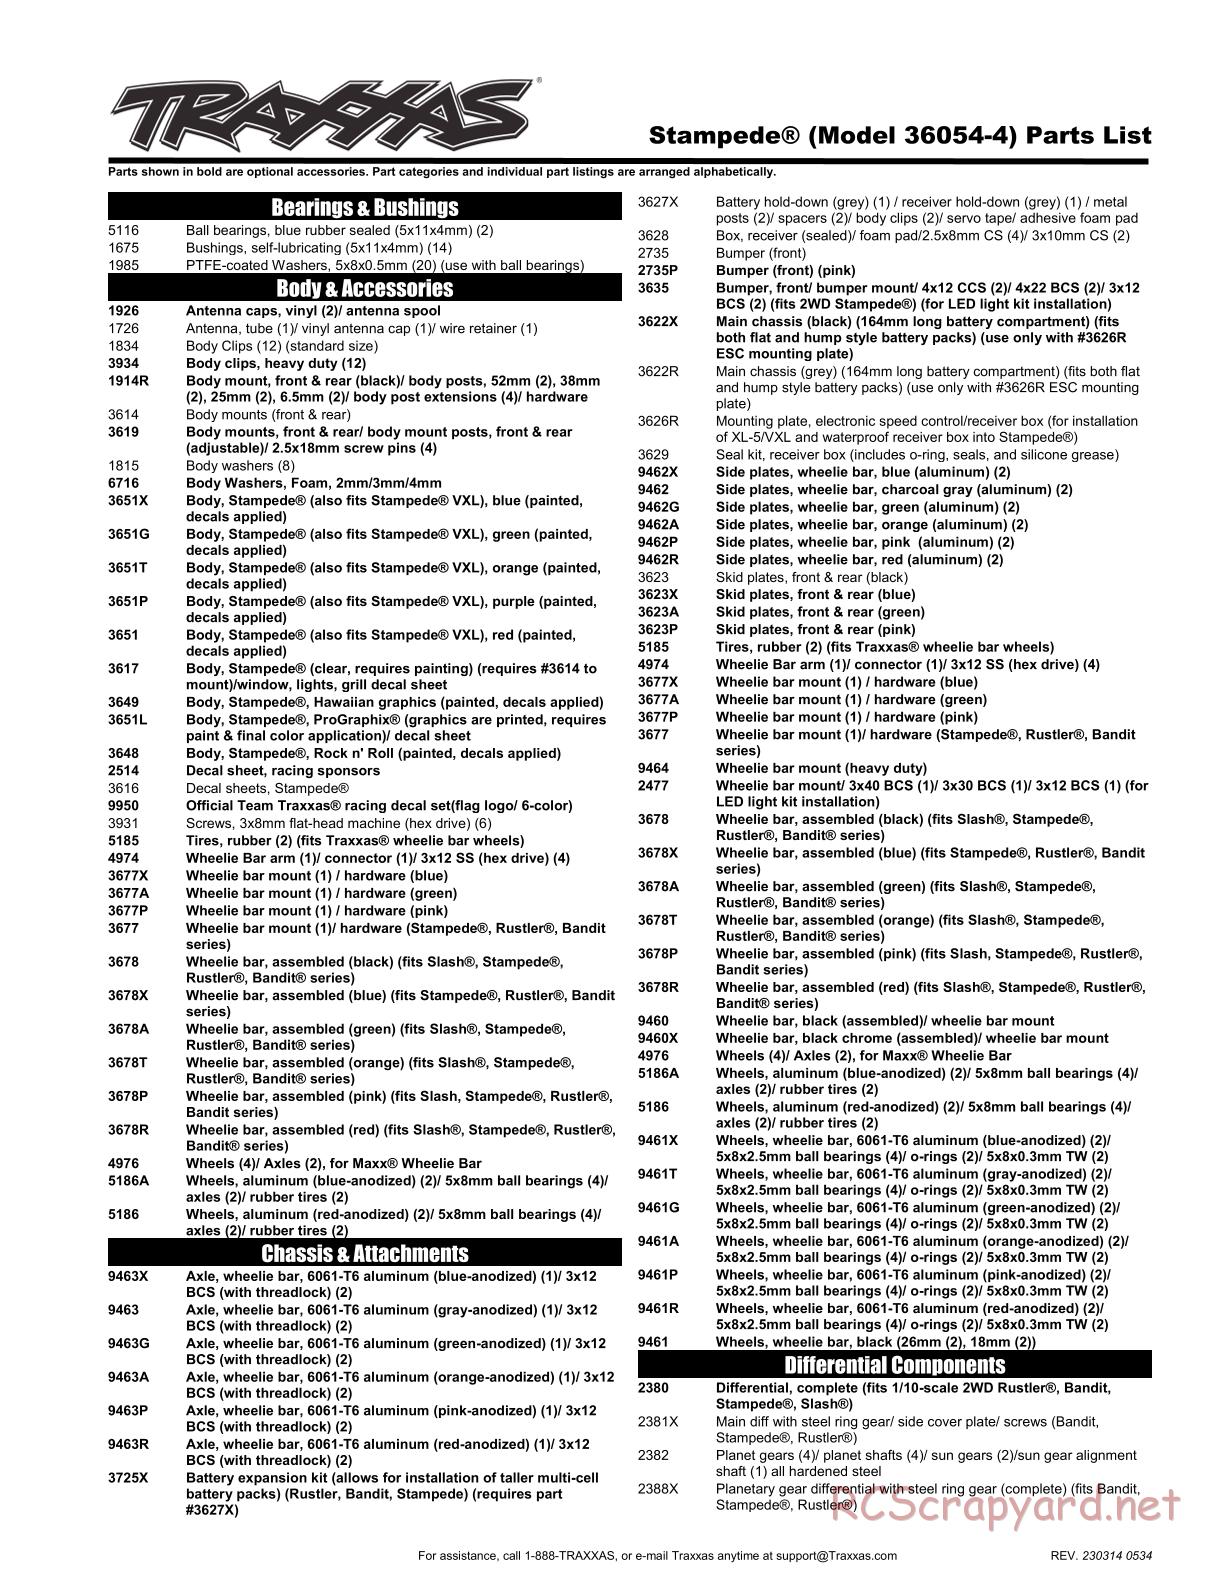 Traxxas - Stampede XL-5 (2018) - Parts List - Page 1